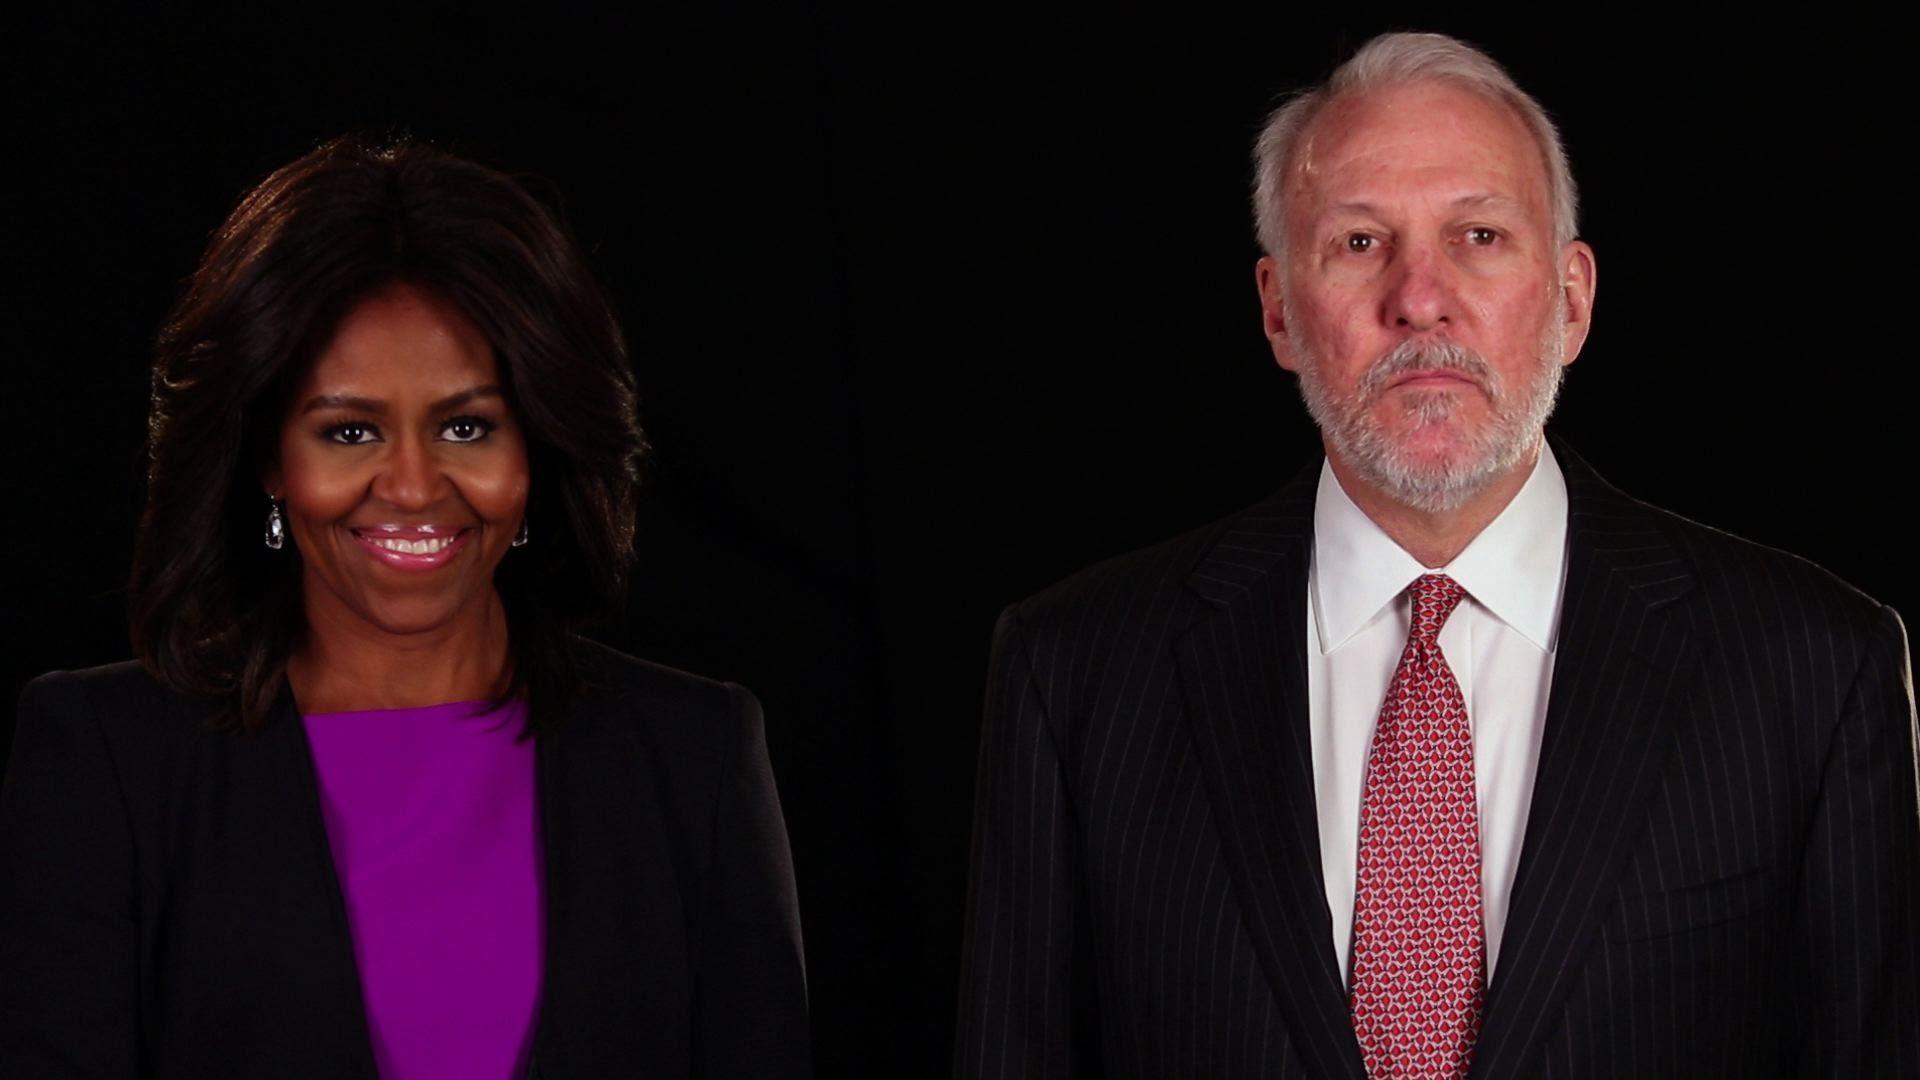 First Lady Michelle Obama & Coach Gregg Popovich of the Spurs Team